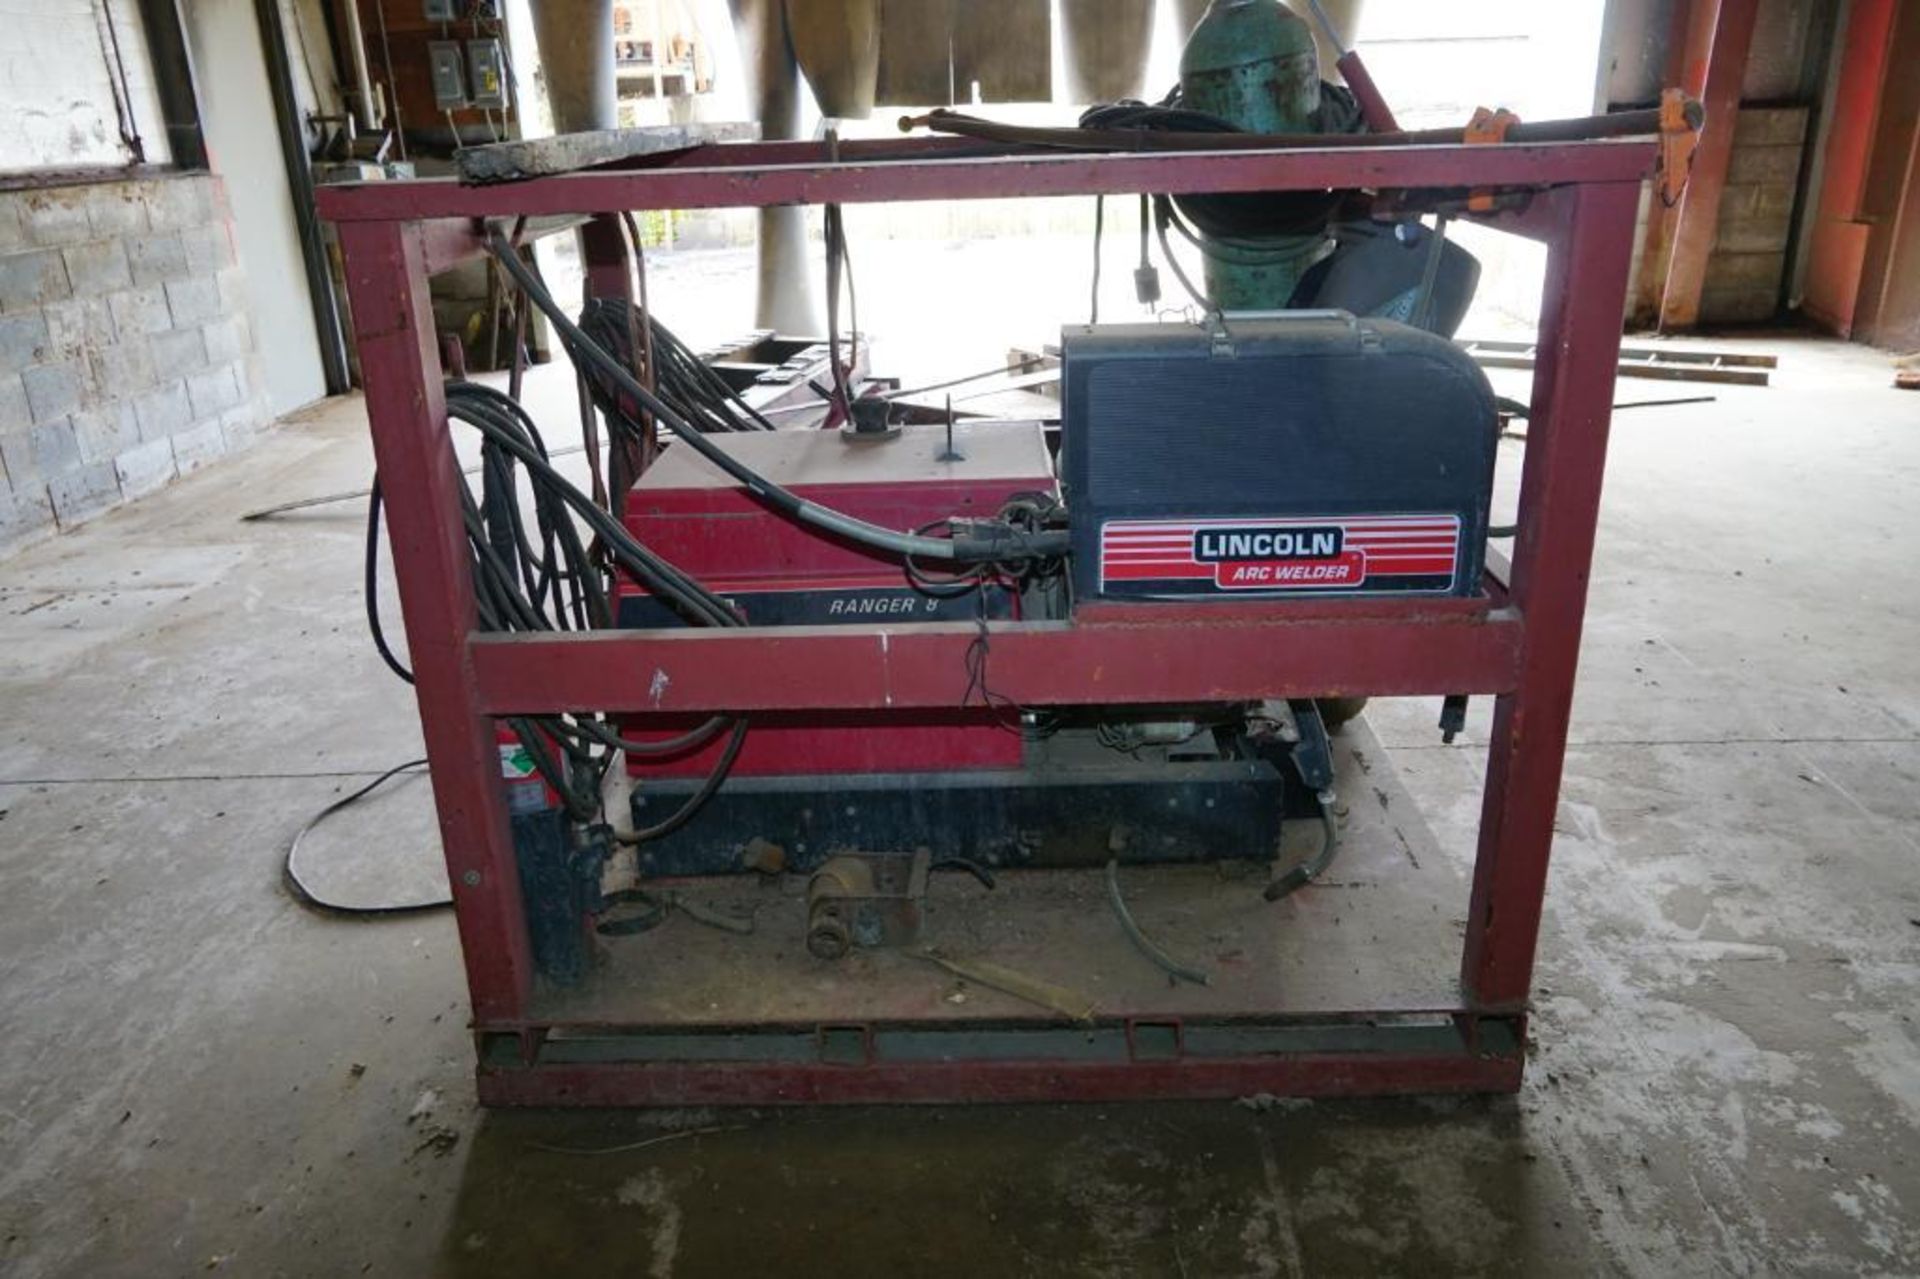 Lincoln Ranger 8 Generator with Lincoln LN-25 Arc Welder - Image 5 of 10